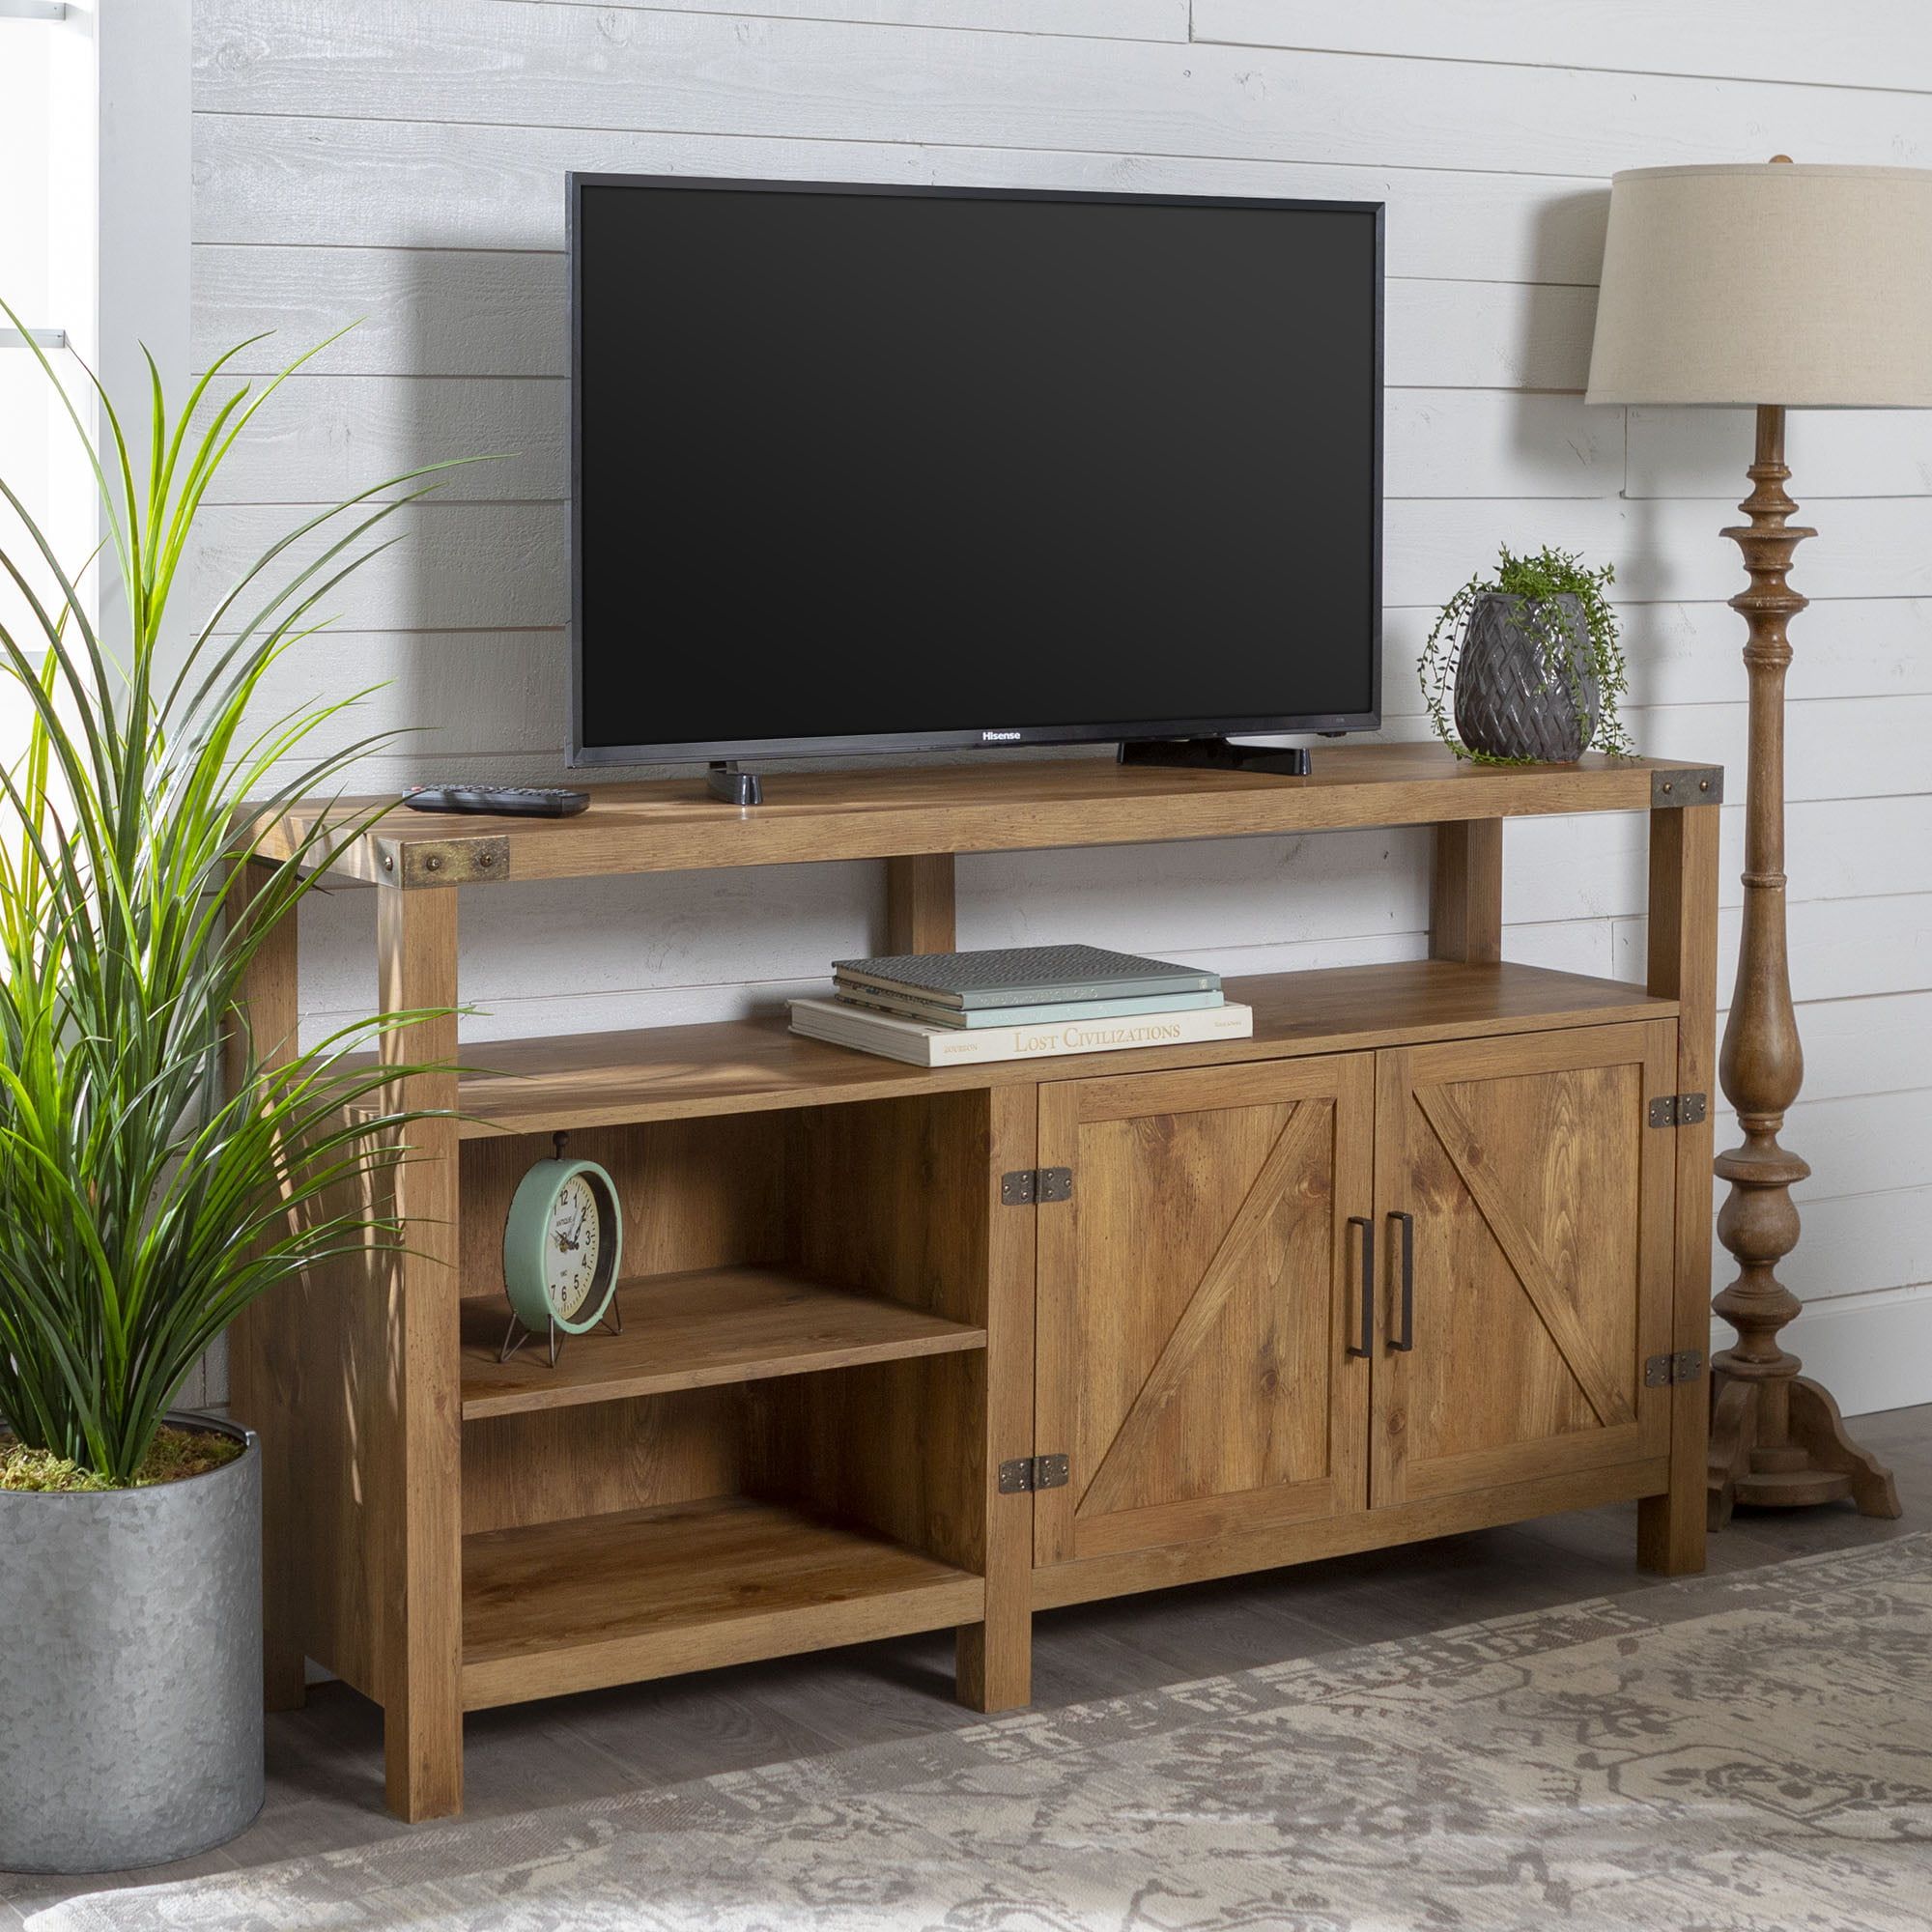 Woven Paths Modern Farmhouse Highboy Tv Stand For Tvs Up To 65 Intended For Farmhouse Tv Stands (Gallery 9 of 20)